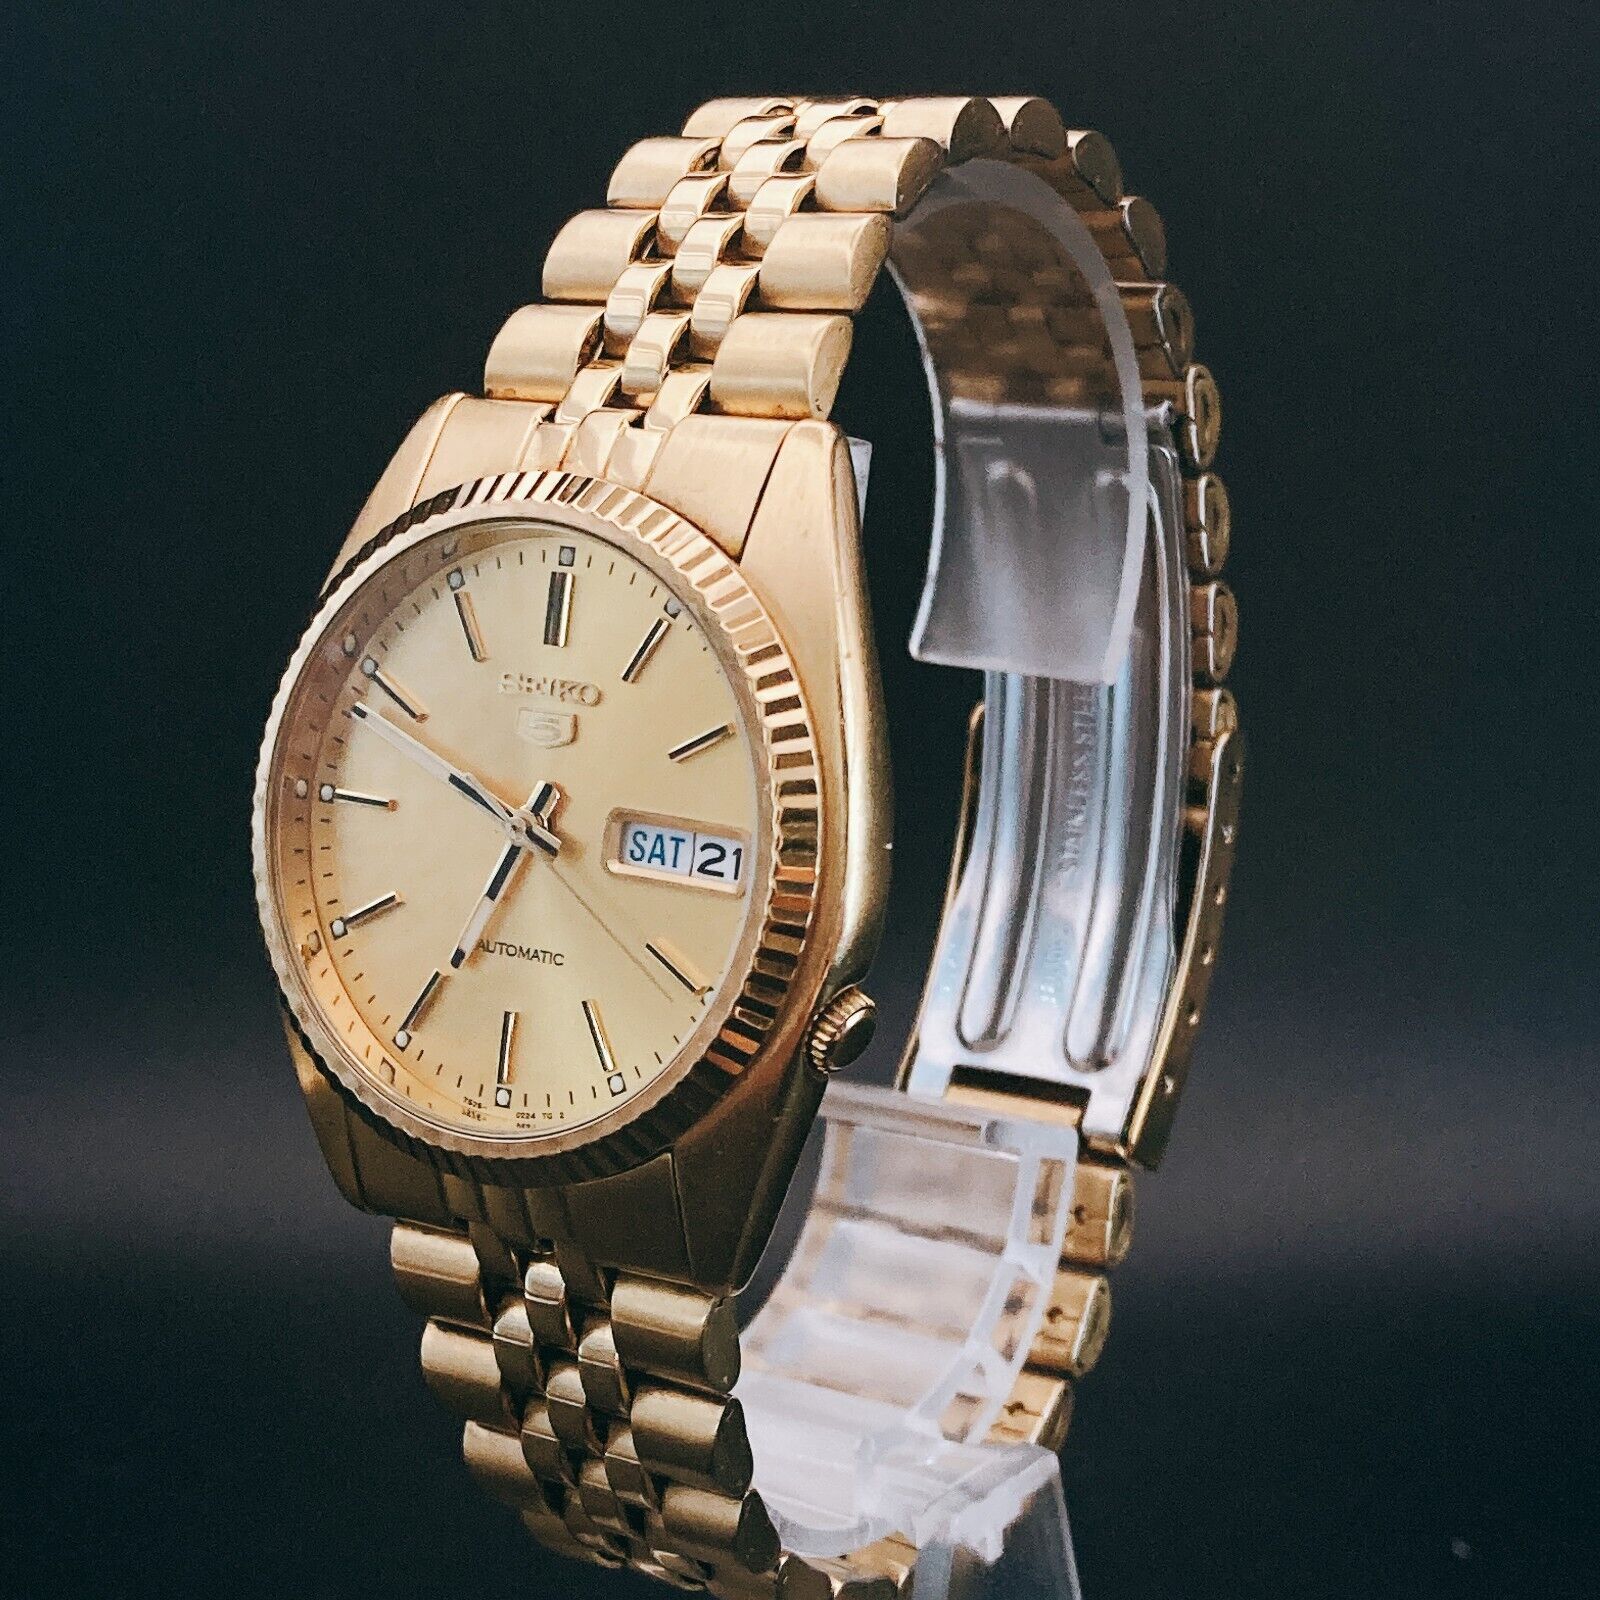 SEIKO 5 Datejust 7S26-0500 Day Date Gold Silver Automatic 【Mint】 SN:471110  | WatchCharts